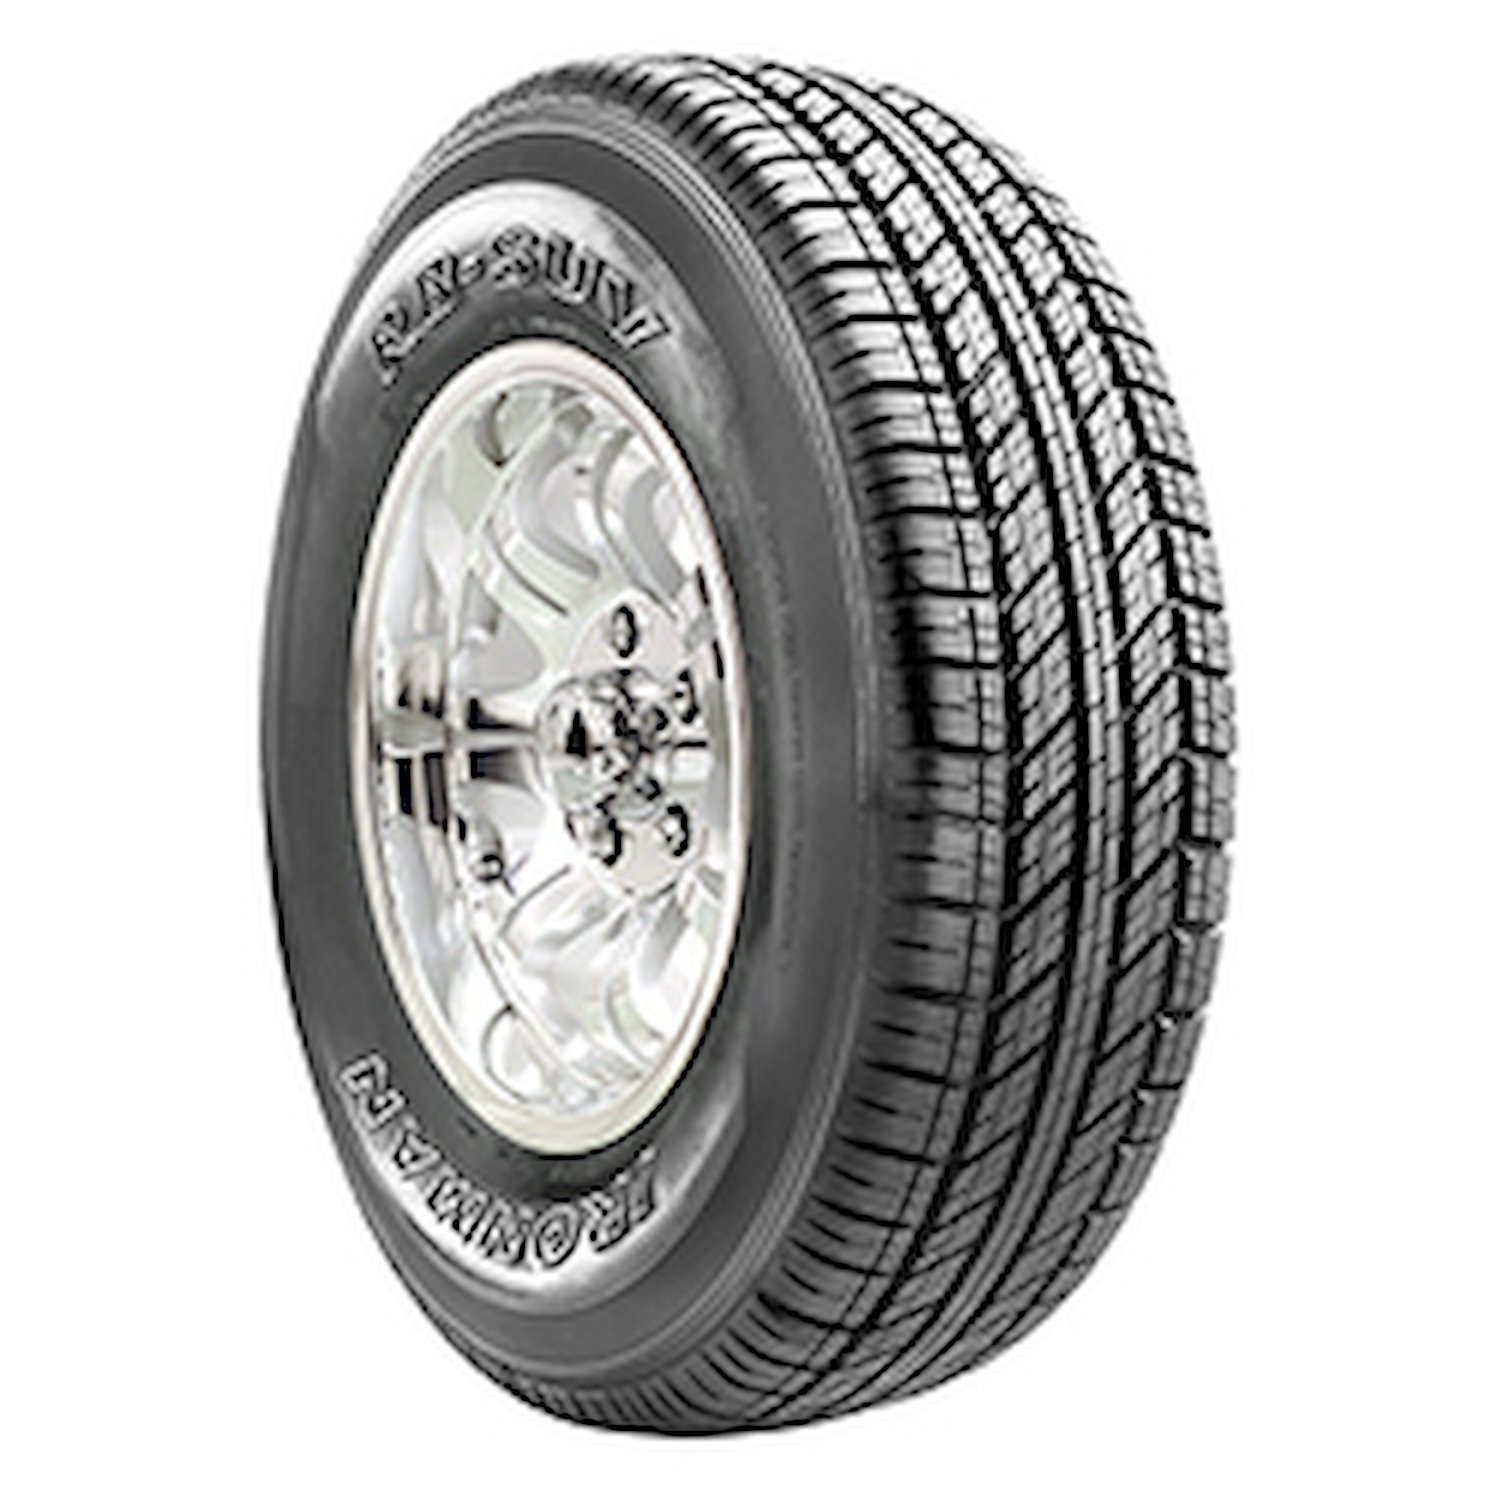 RB SUV Tire, 235/55R18 100H